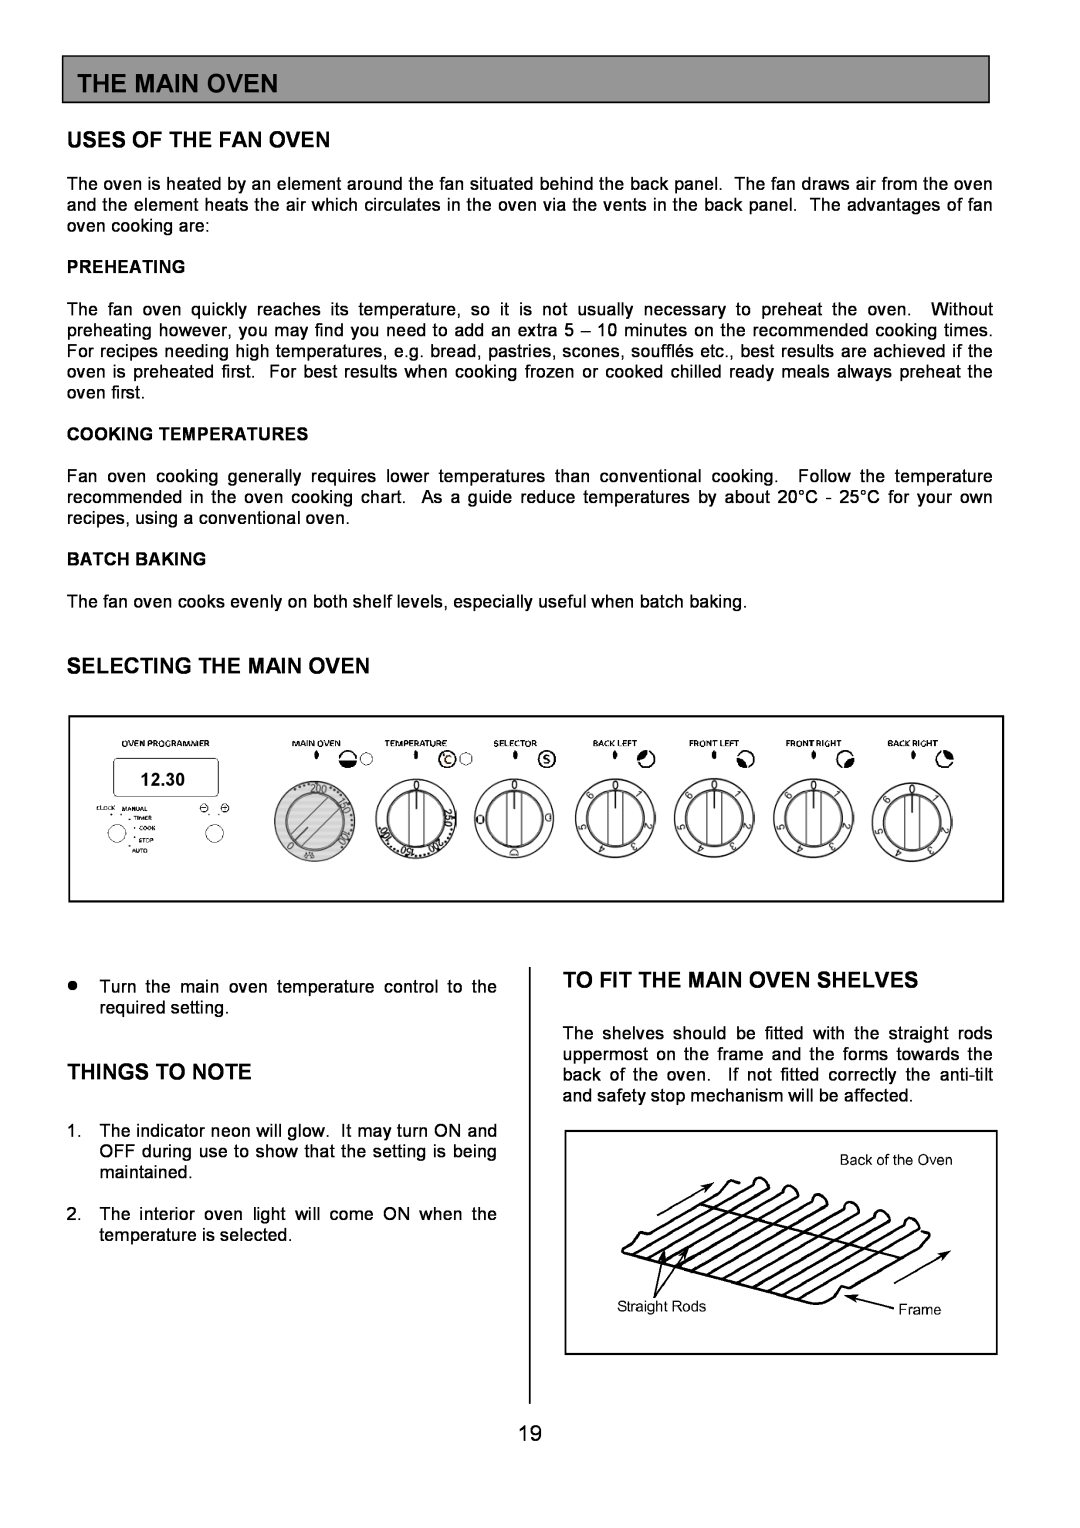 Tricity Bendix SB463 Uses Of The Fan Oven, Selecting The Main Oven, To Fit The Main Oven Shelves, Things To Note 